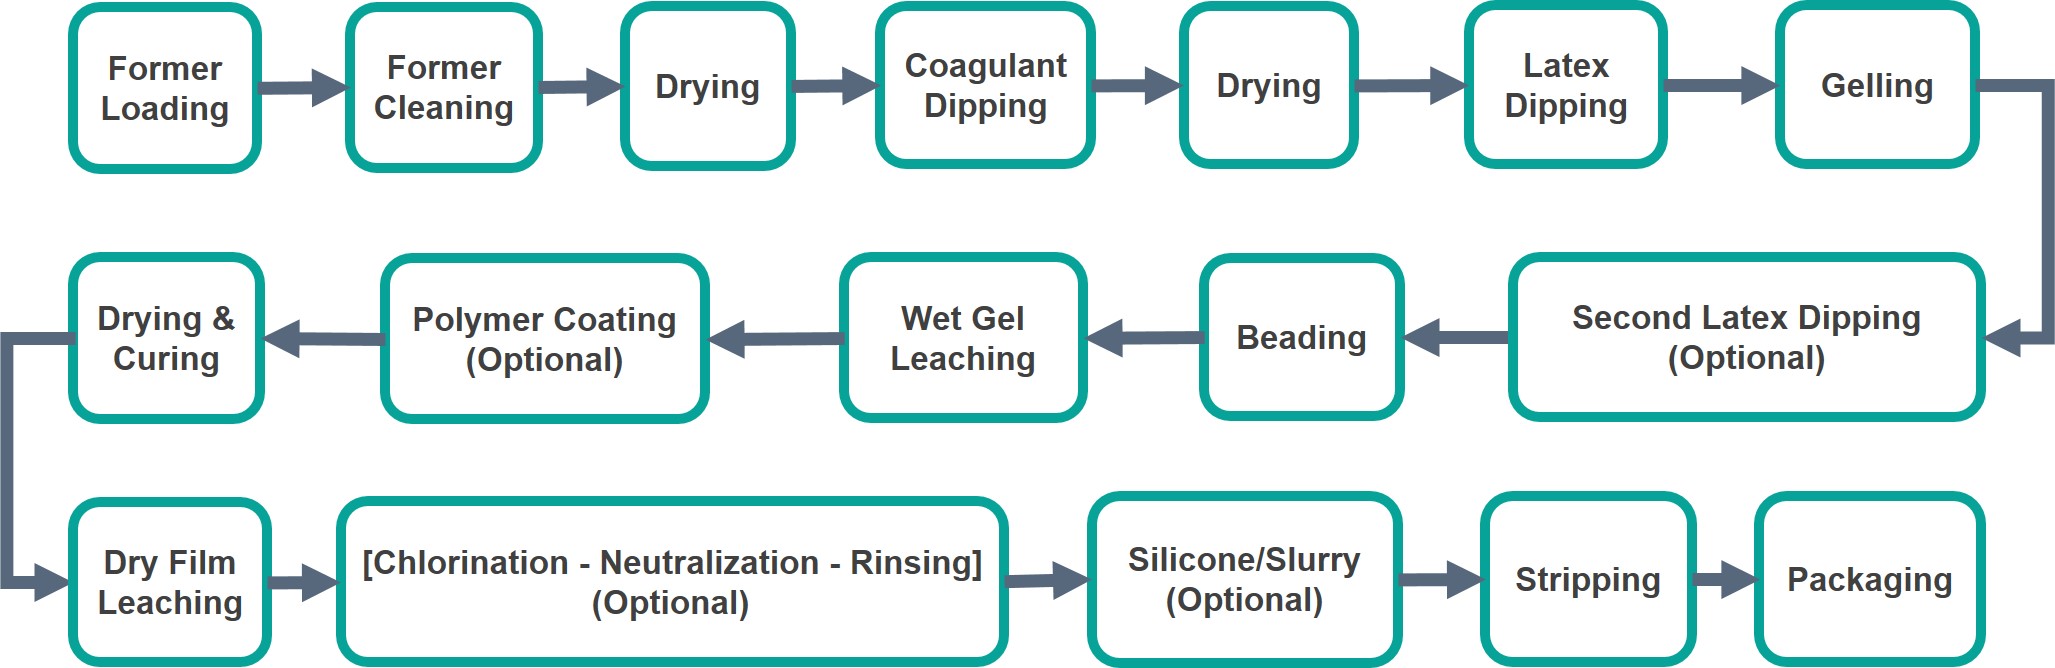 Online dipping process for nitrile glove